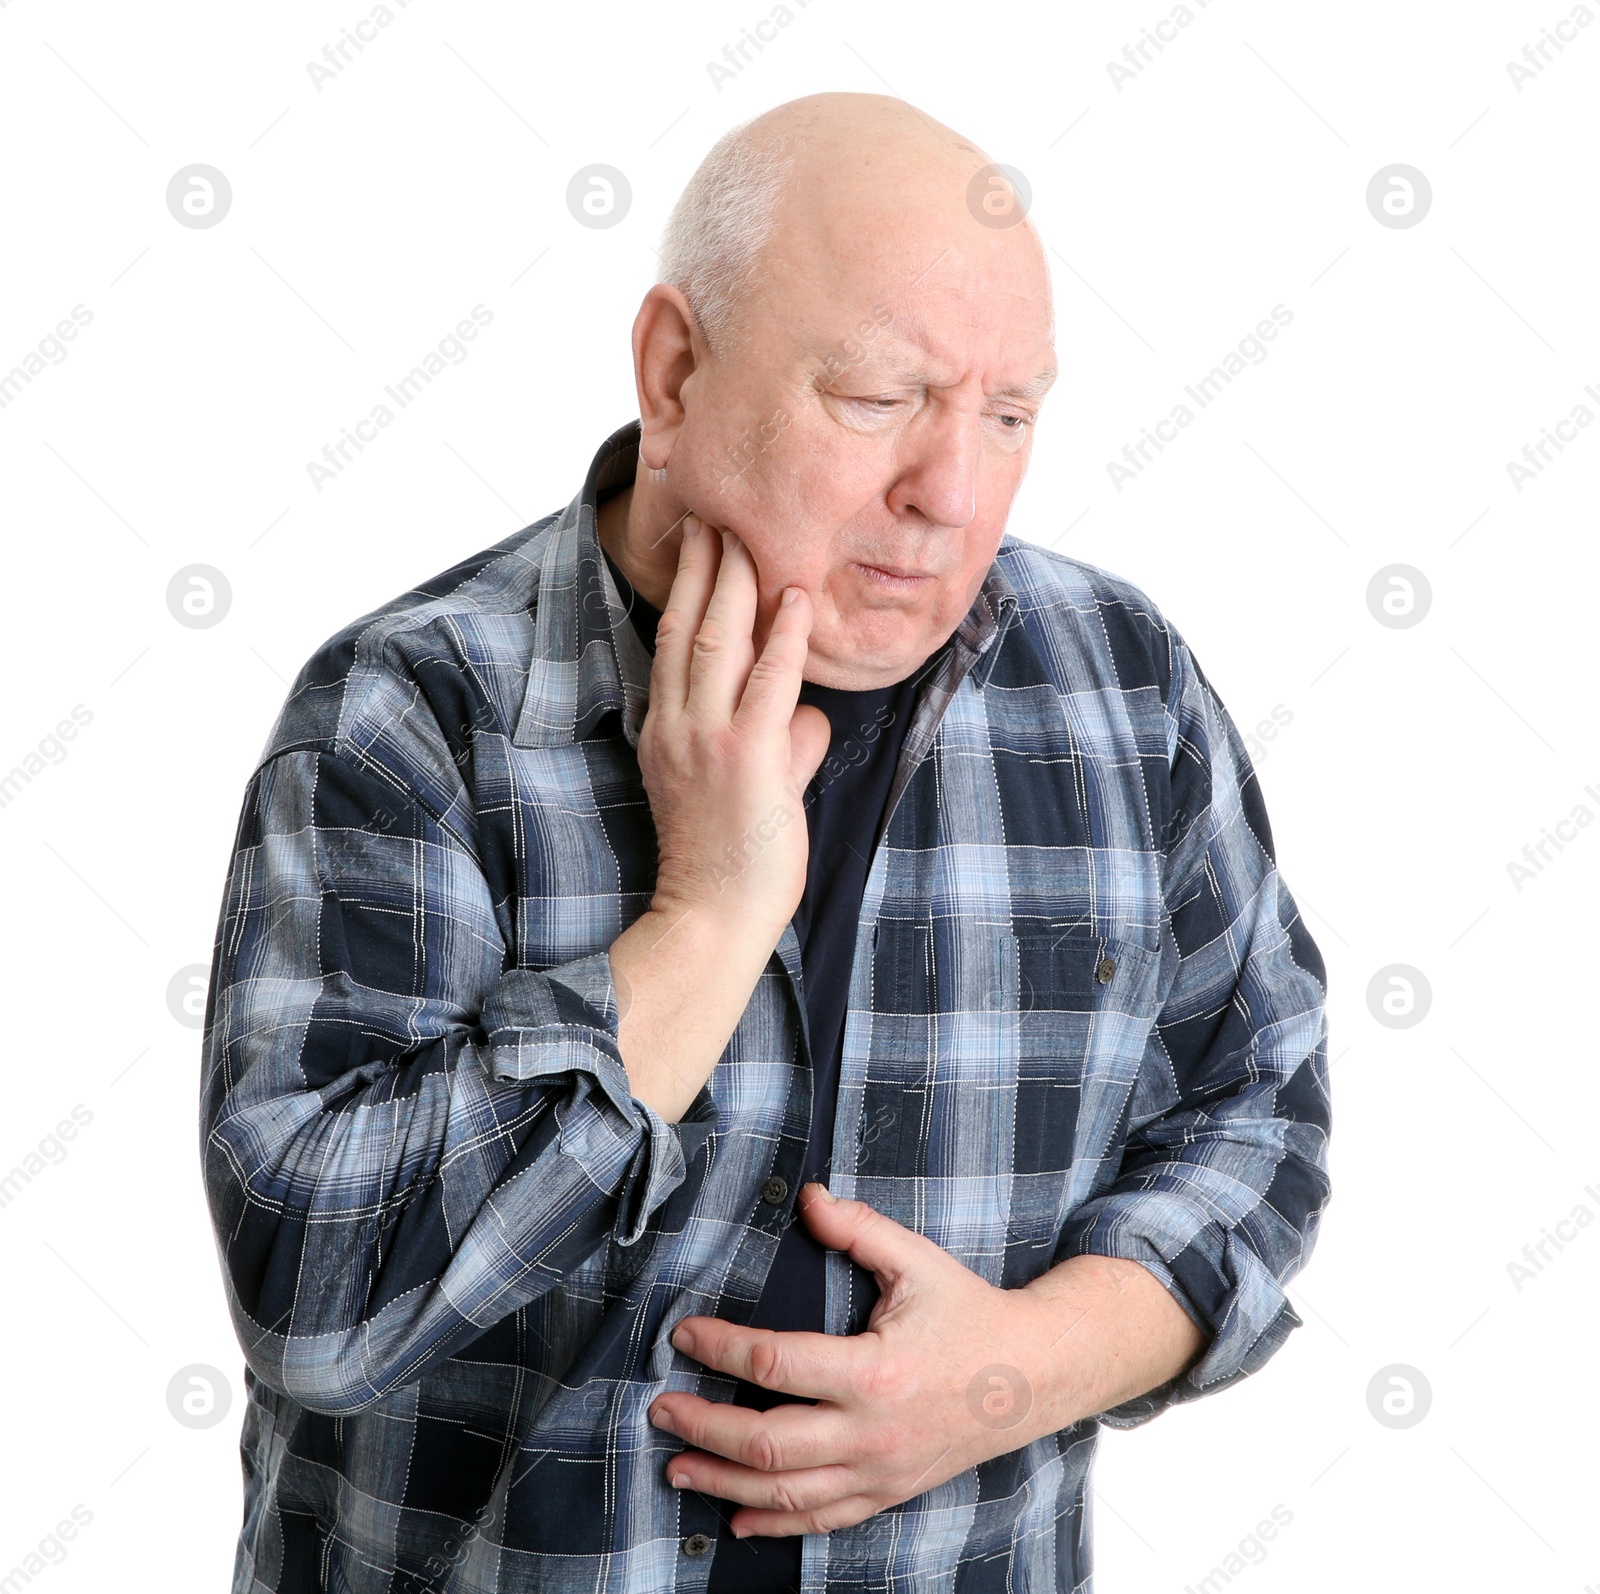 Photo of Senior man suffering from cough on white background